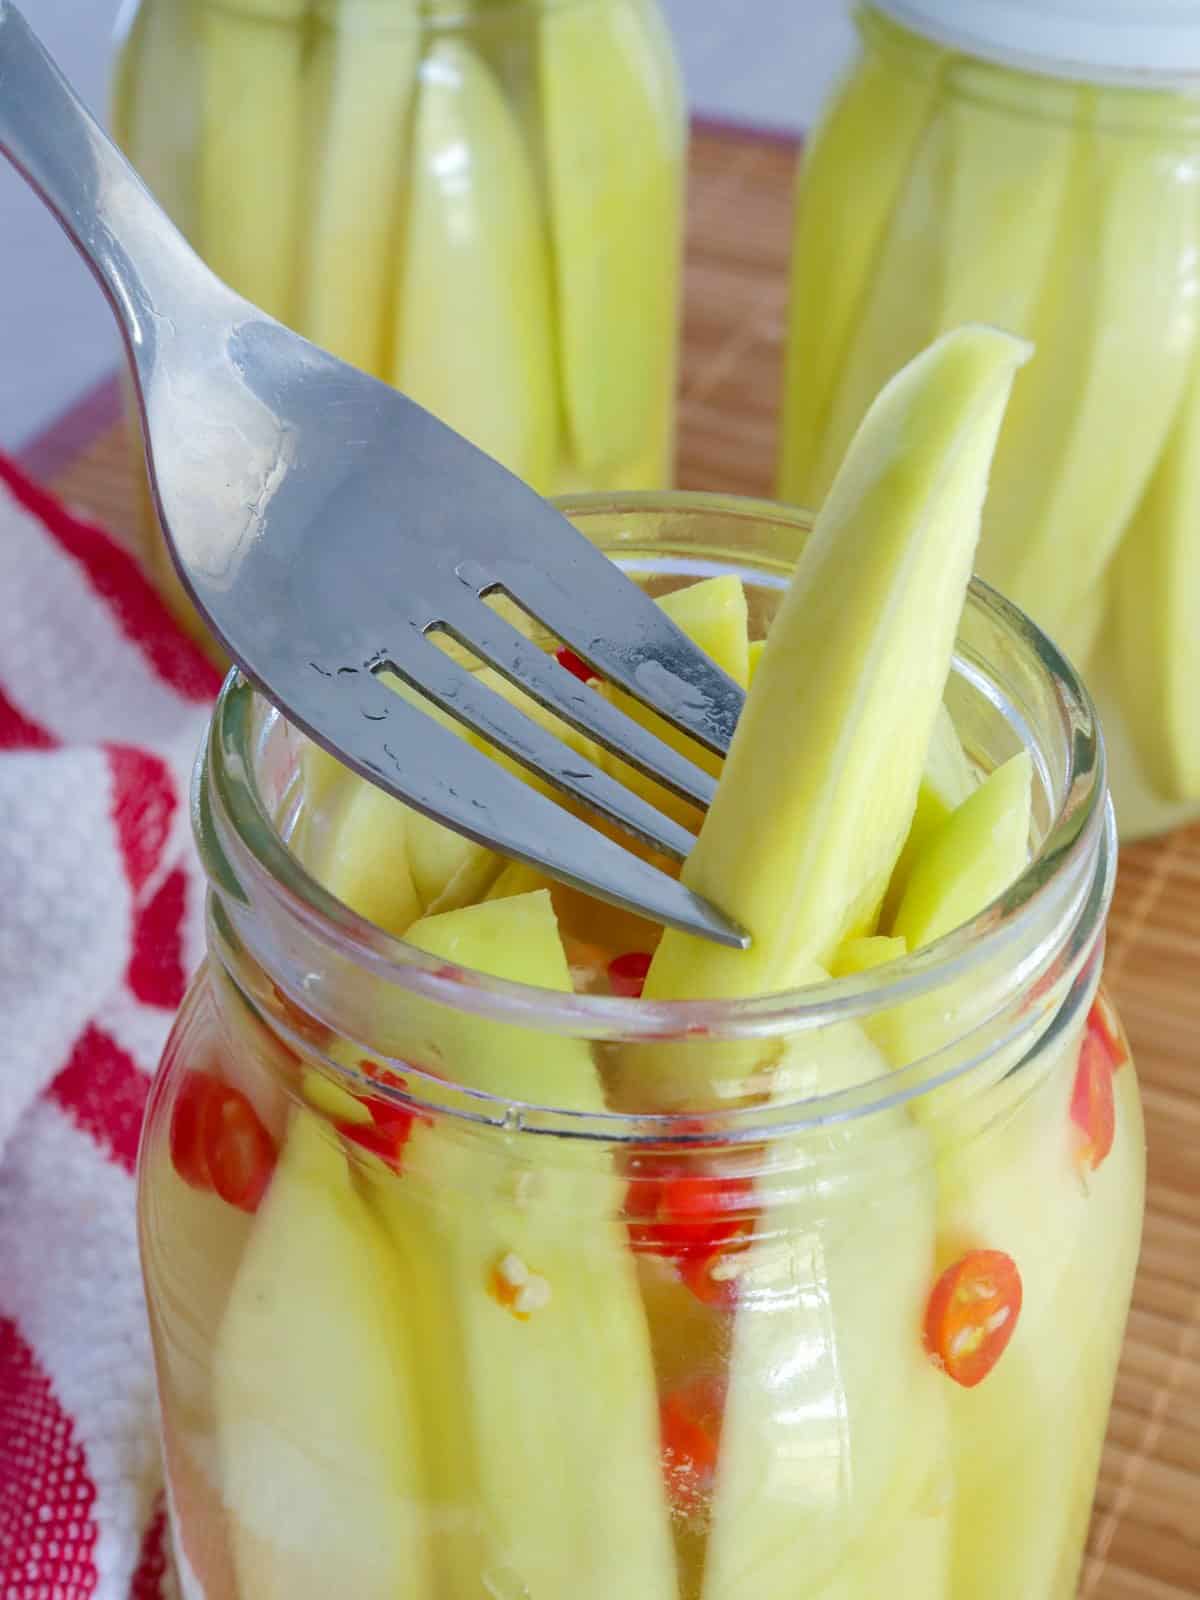 serving burong mangga with a fork from a jar